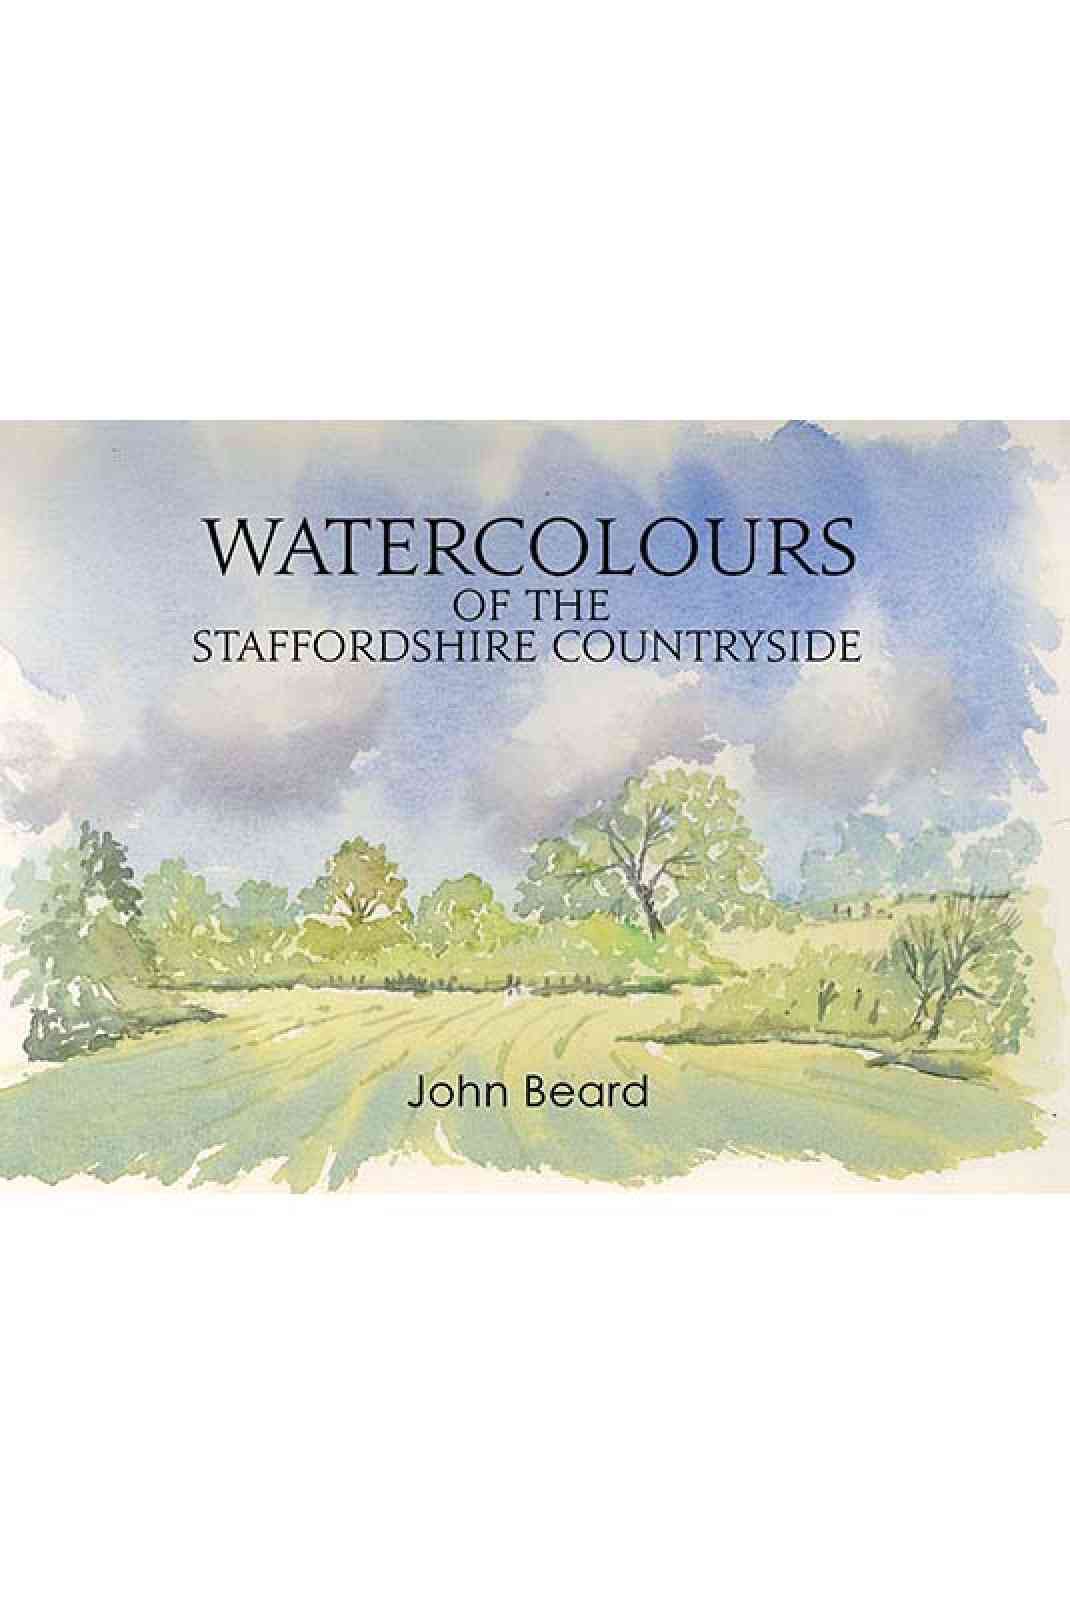  ‘Watercolours of the Staffordshire Countryside’ by John Beard Featured in a Newspaper